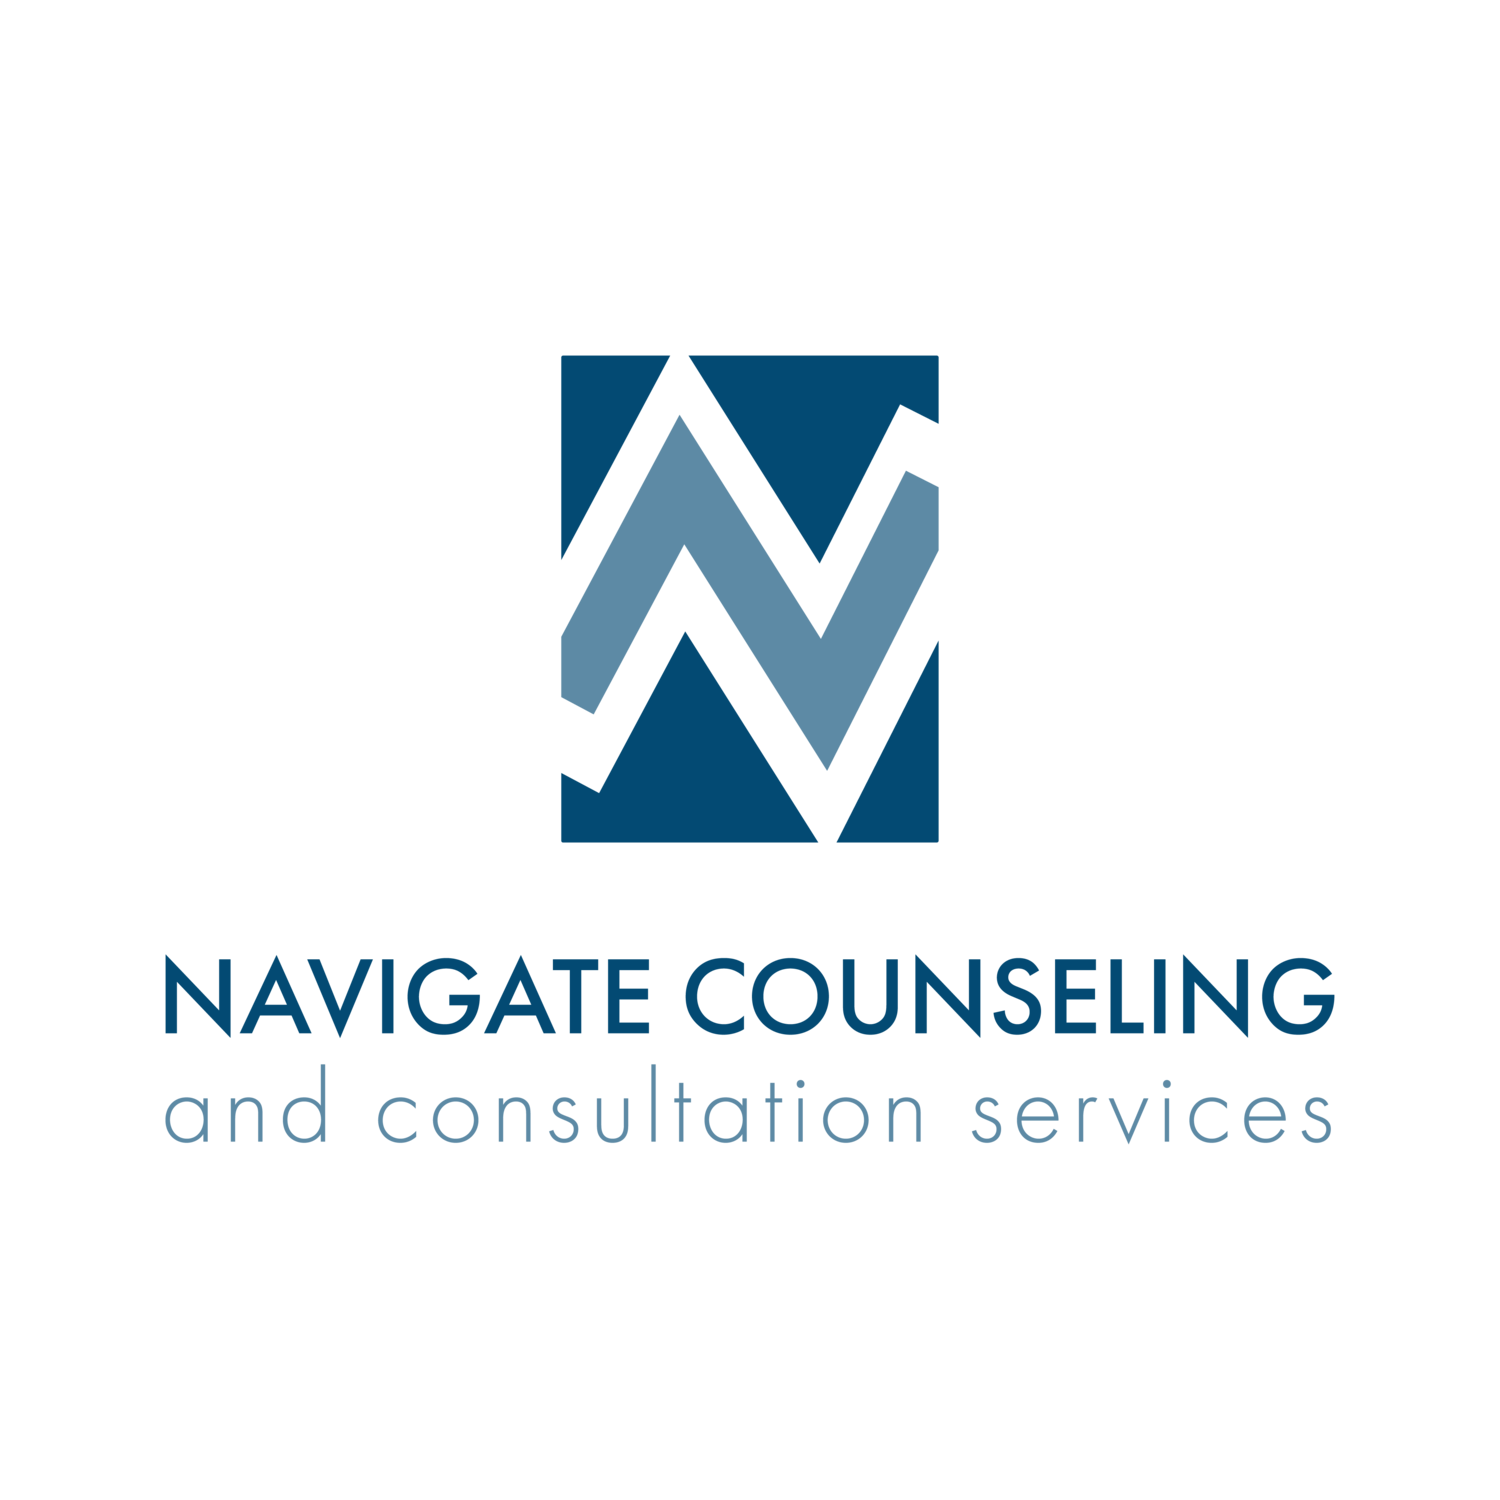 Navigate Counseling and Consultation Services